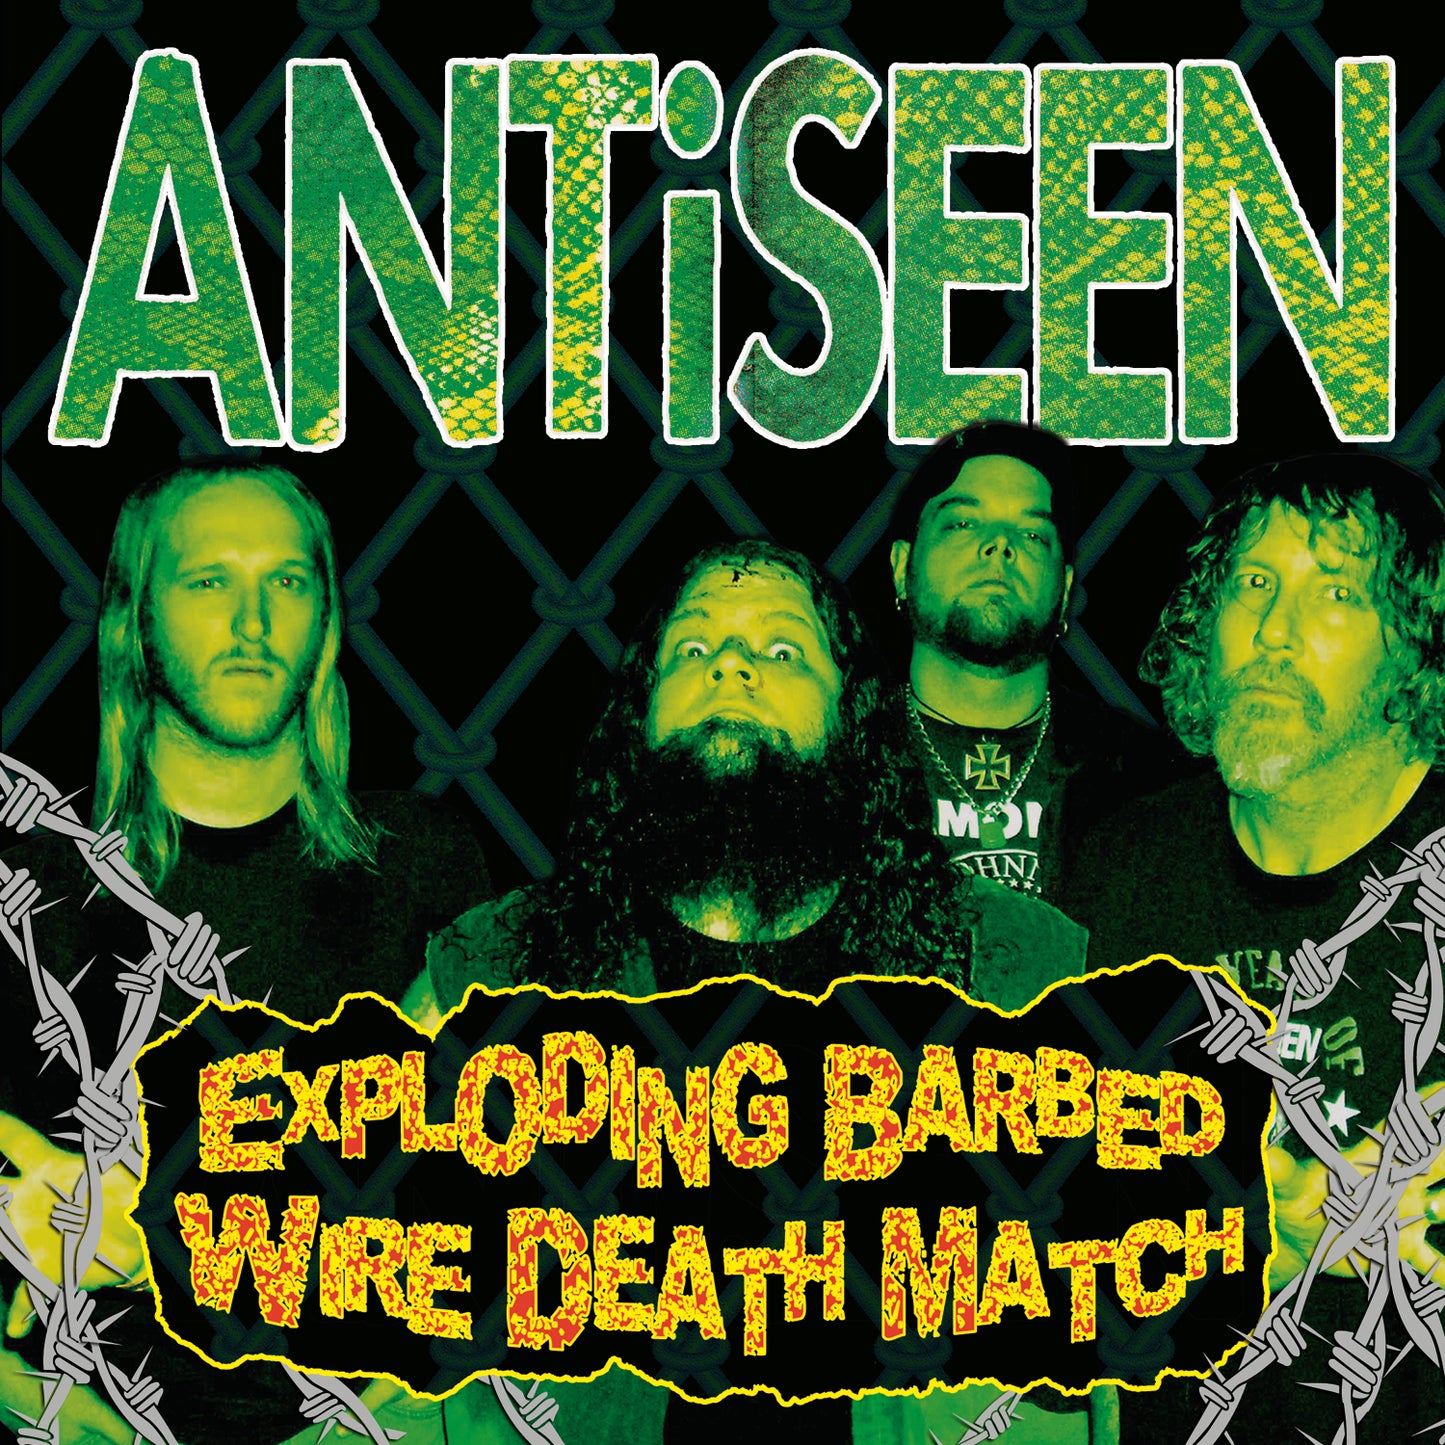 Antiseen - Exploding Barbed Wire Death Ma tch EP - 7 inch (Vinyl)